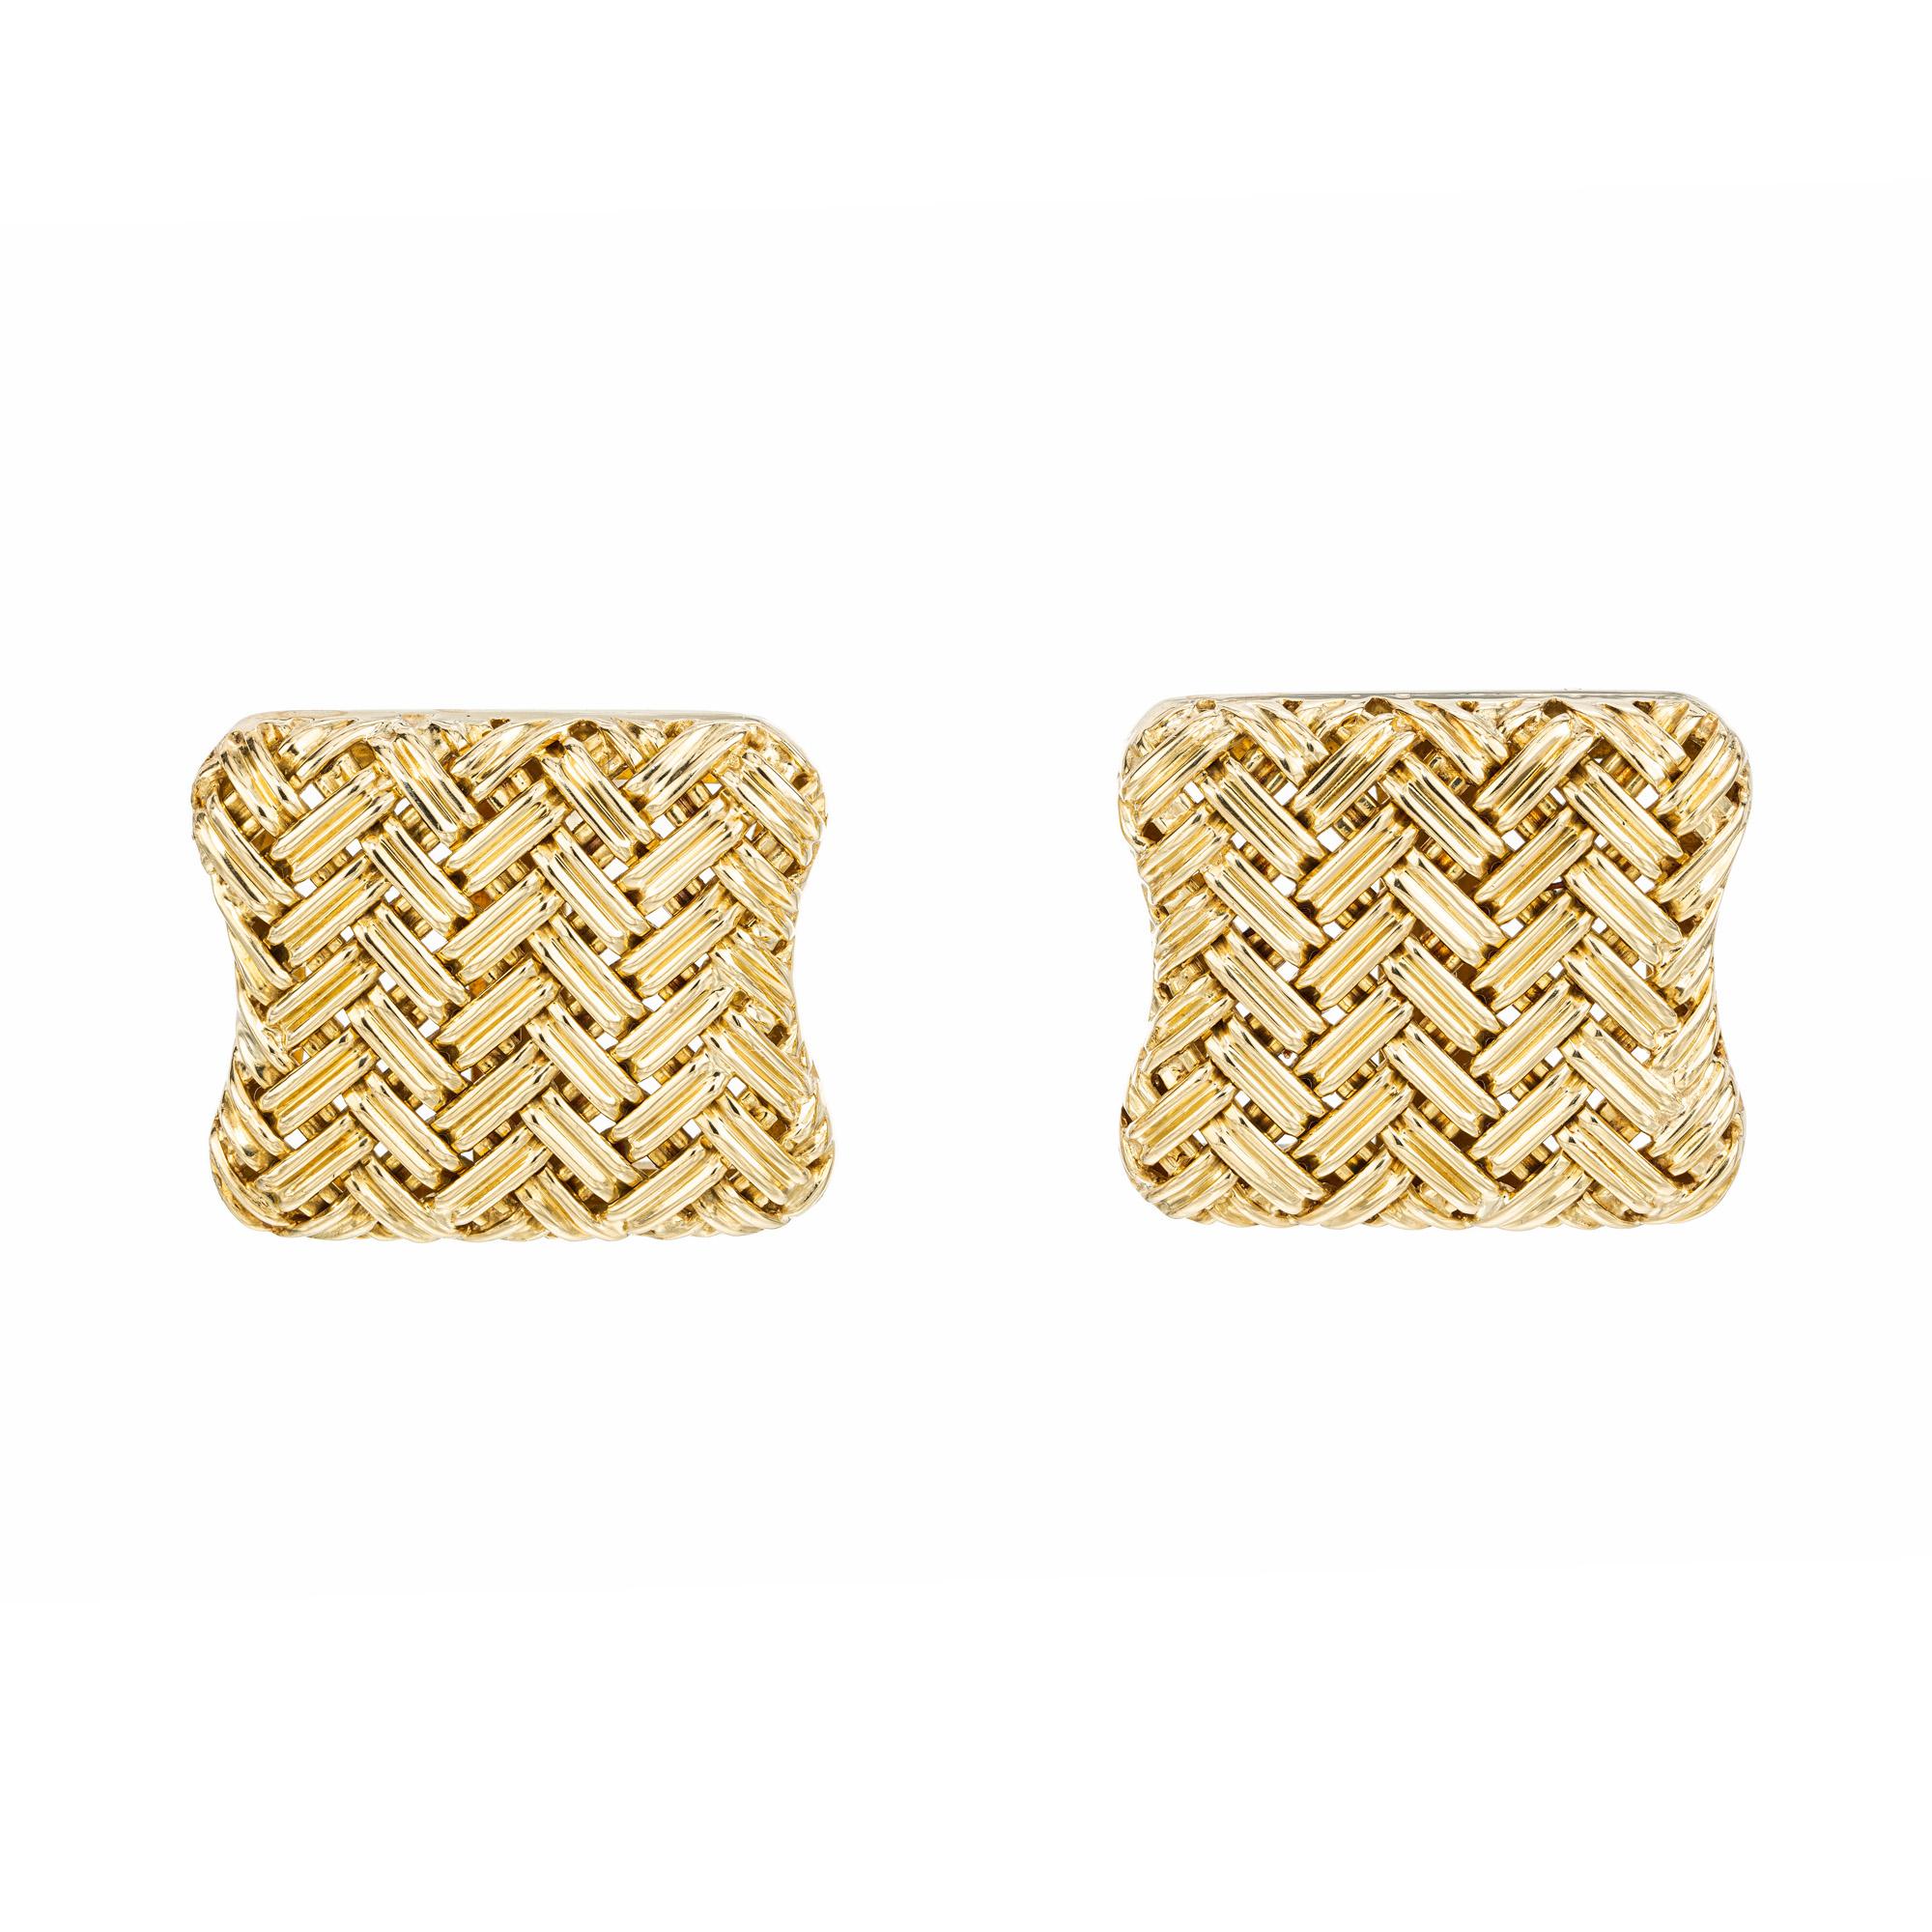 Elevate your formal attire with these exquisite 1960's, 18k Yellow Gold Italian Basket Weave Men's Cufflinks. The intricate basket weave design adds texture and depth to the cufflinks, making them the perfect statement accessory.  The yellow gold